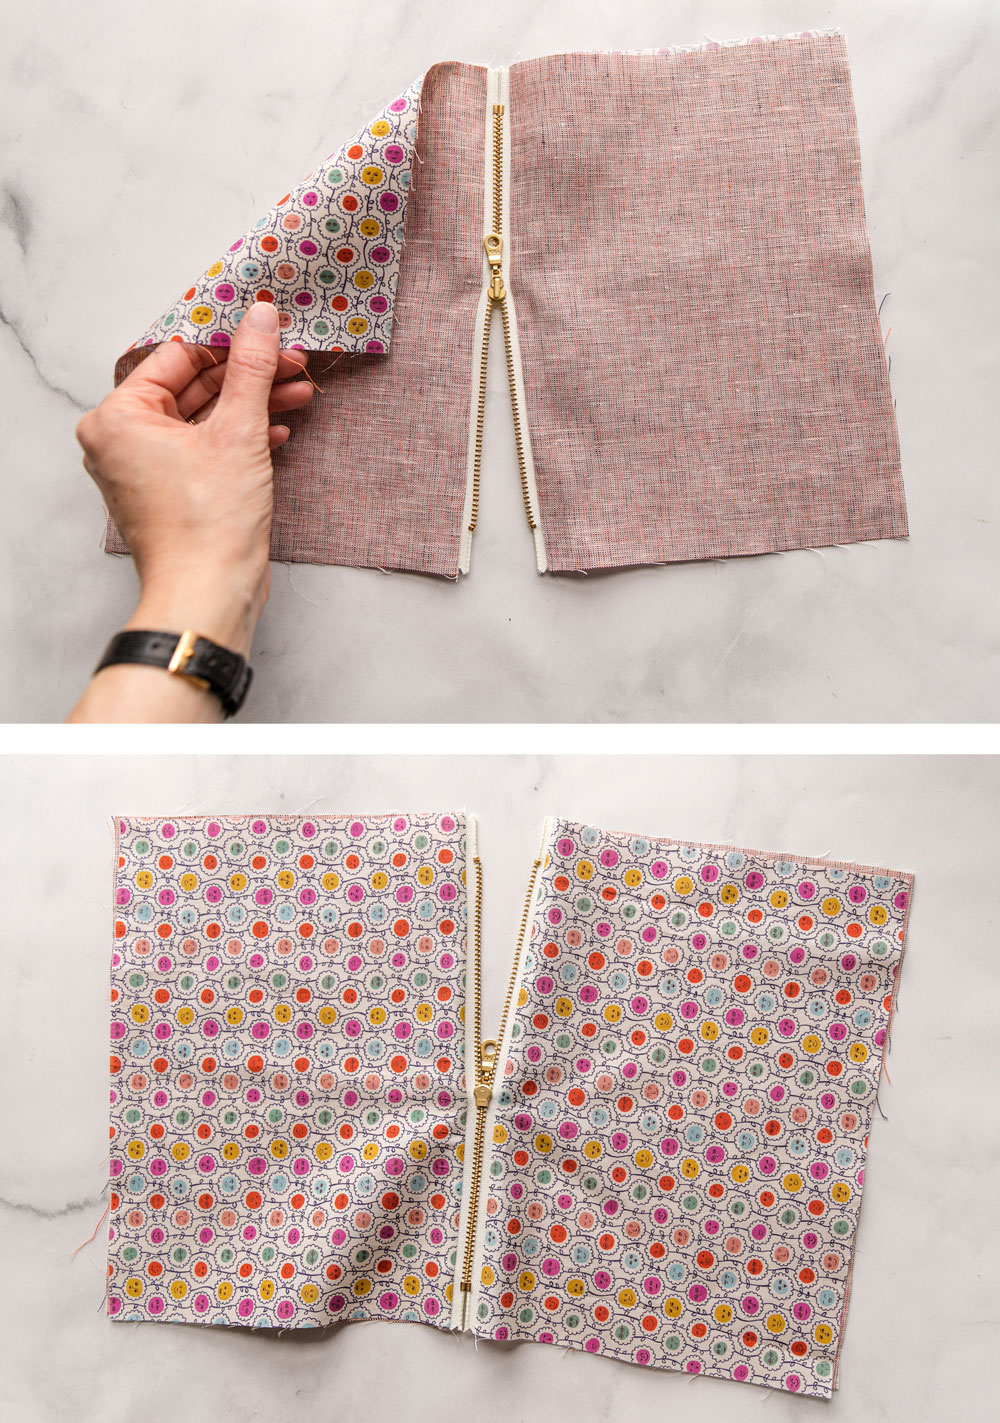 This easy zipper pouch tutorial shows exactly how to sew a simple pouch using scrap fabric and a zipper of any size. suzyquilts.com #zipperpouch #pouchtutorial